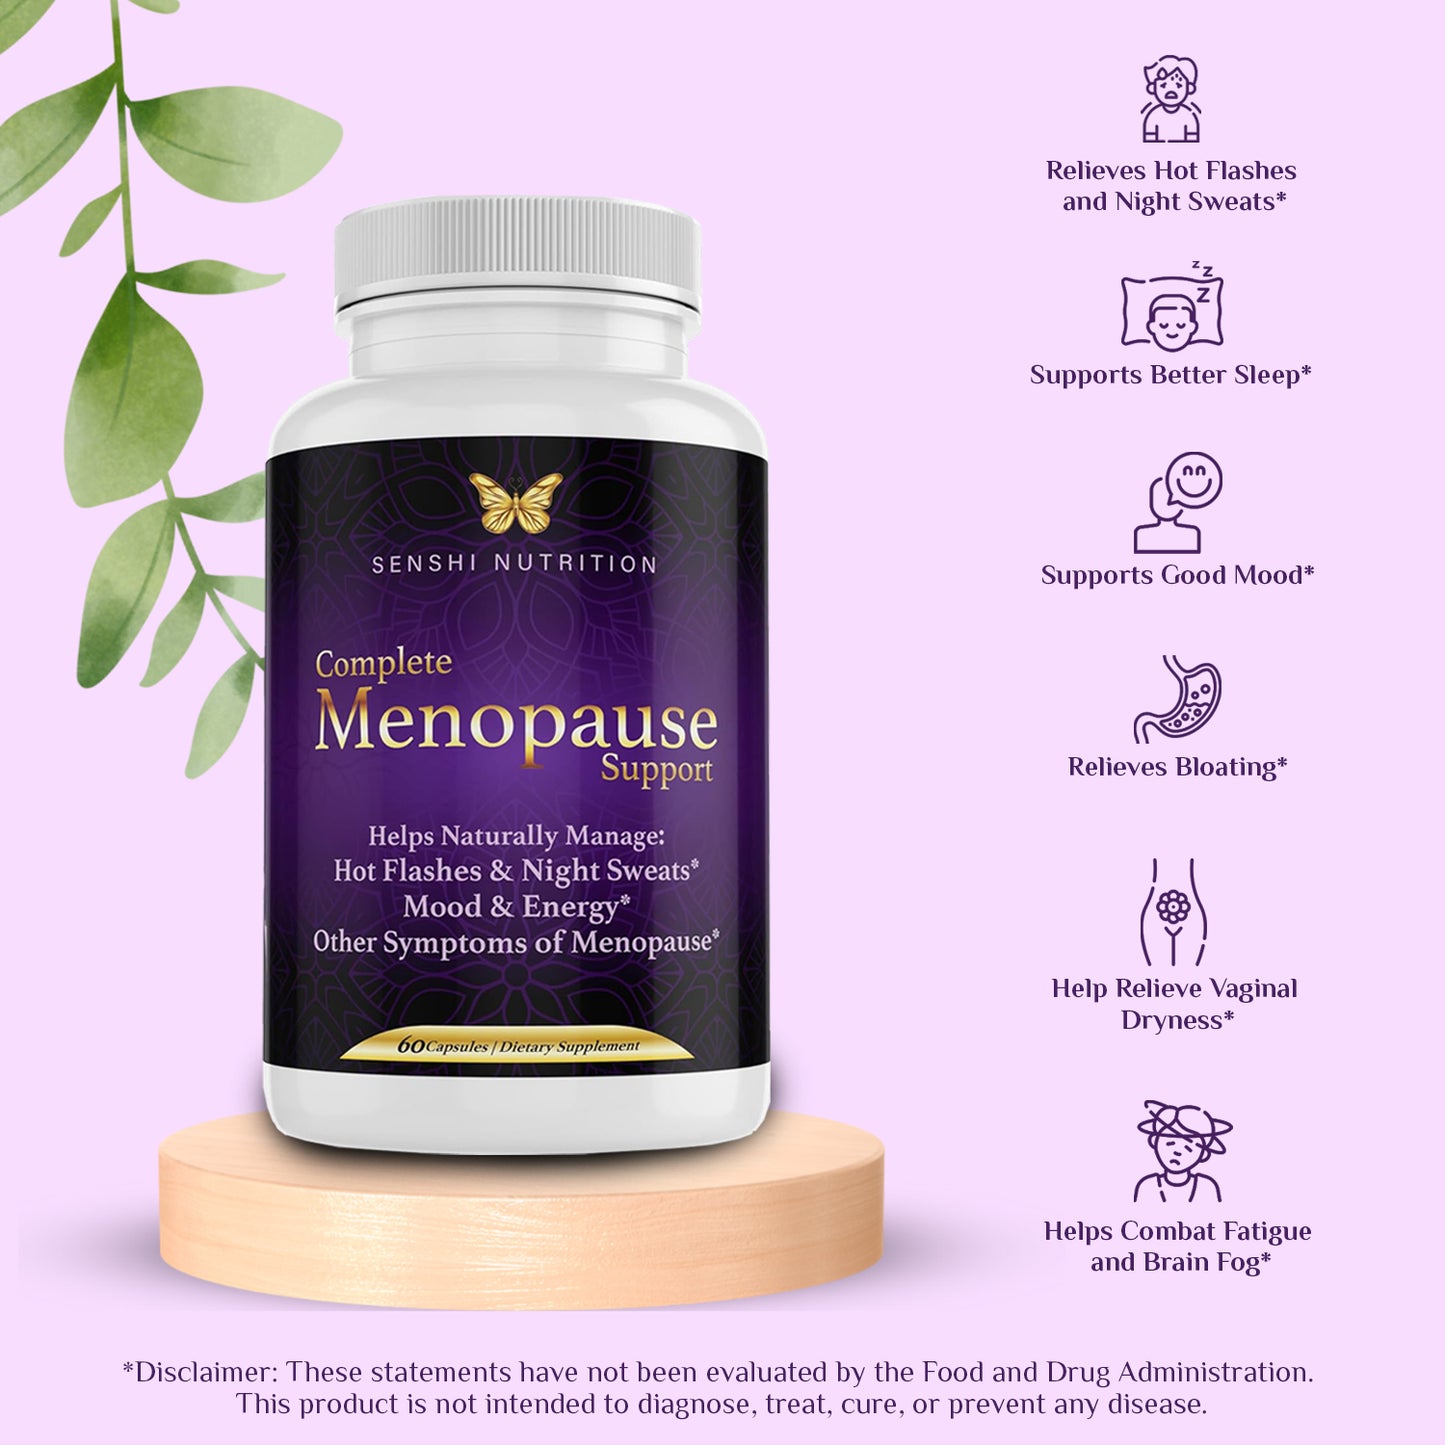 Complete Menopause Support - Gluten Free, GMO Free, Dairy Free Capsules